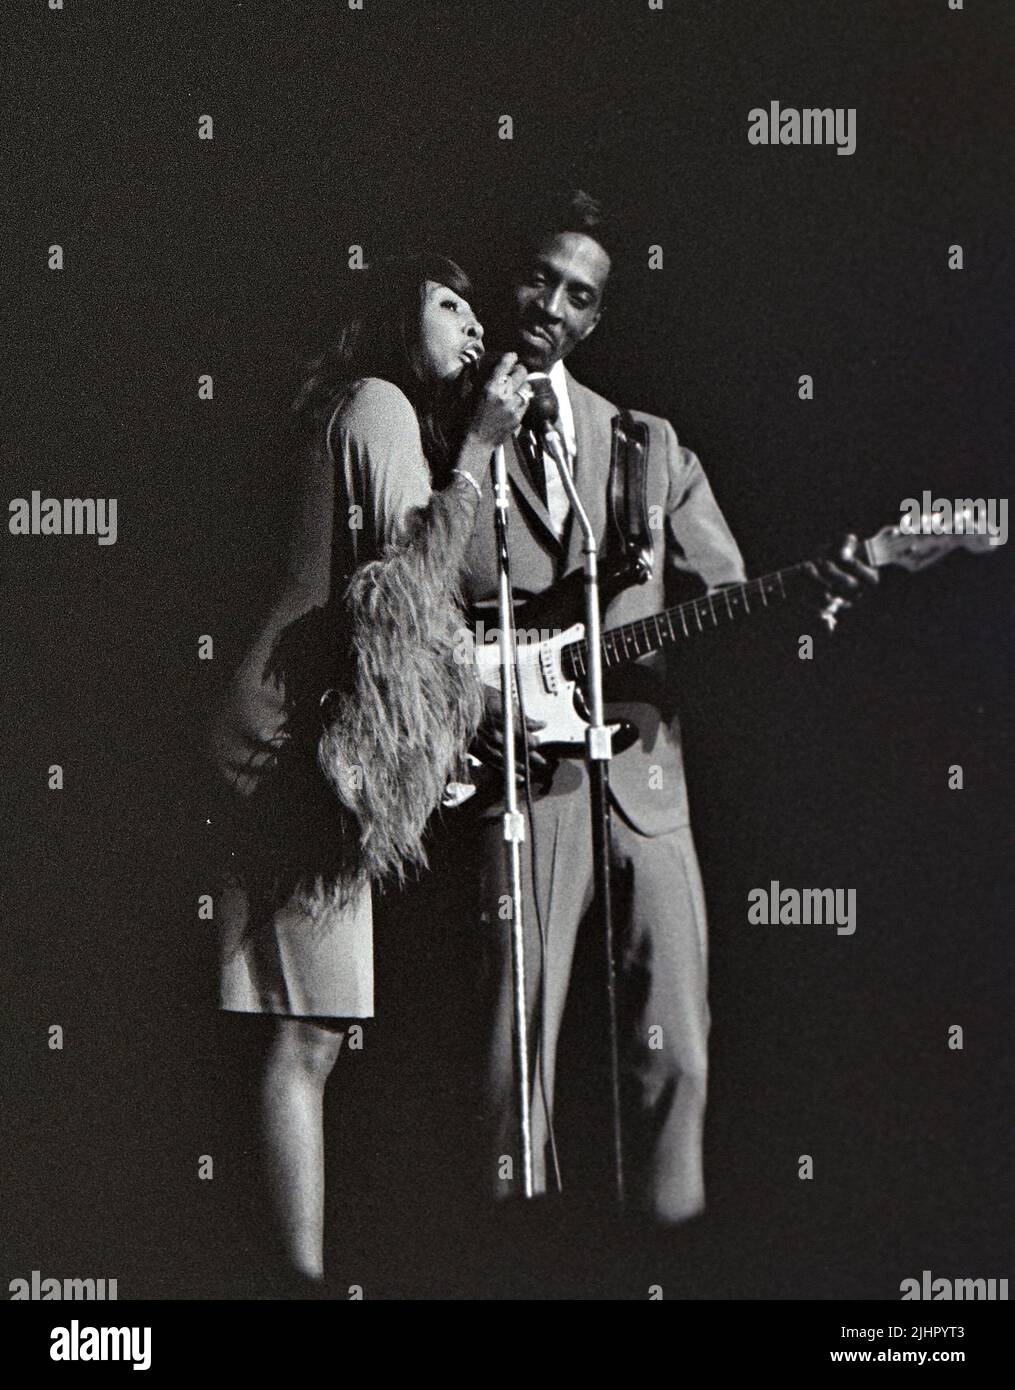 IKE AND TINA TURNER as the opening act for the Rolling Stones 1966 UK tour Stock Photo